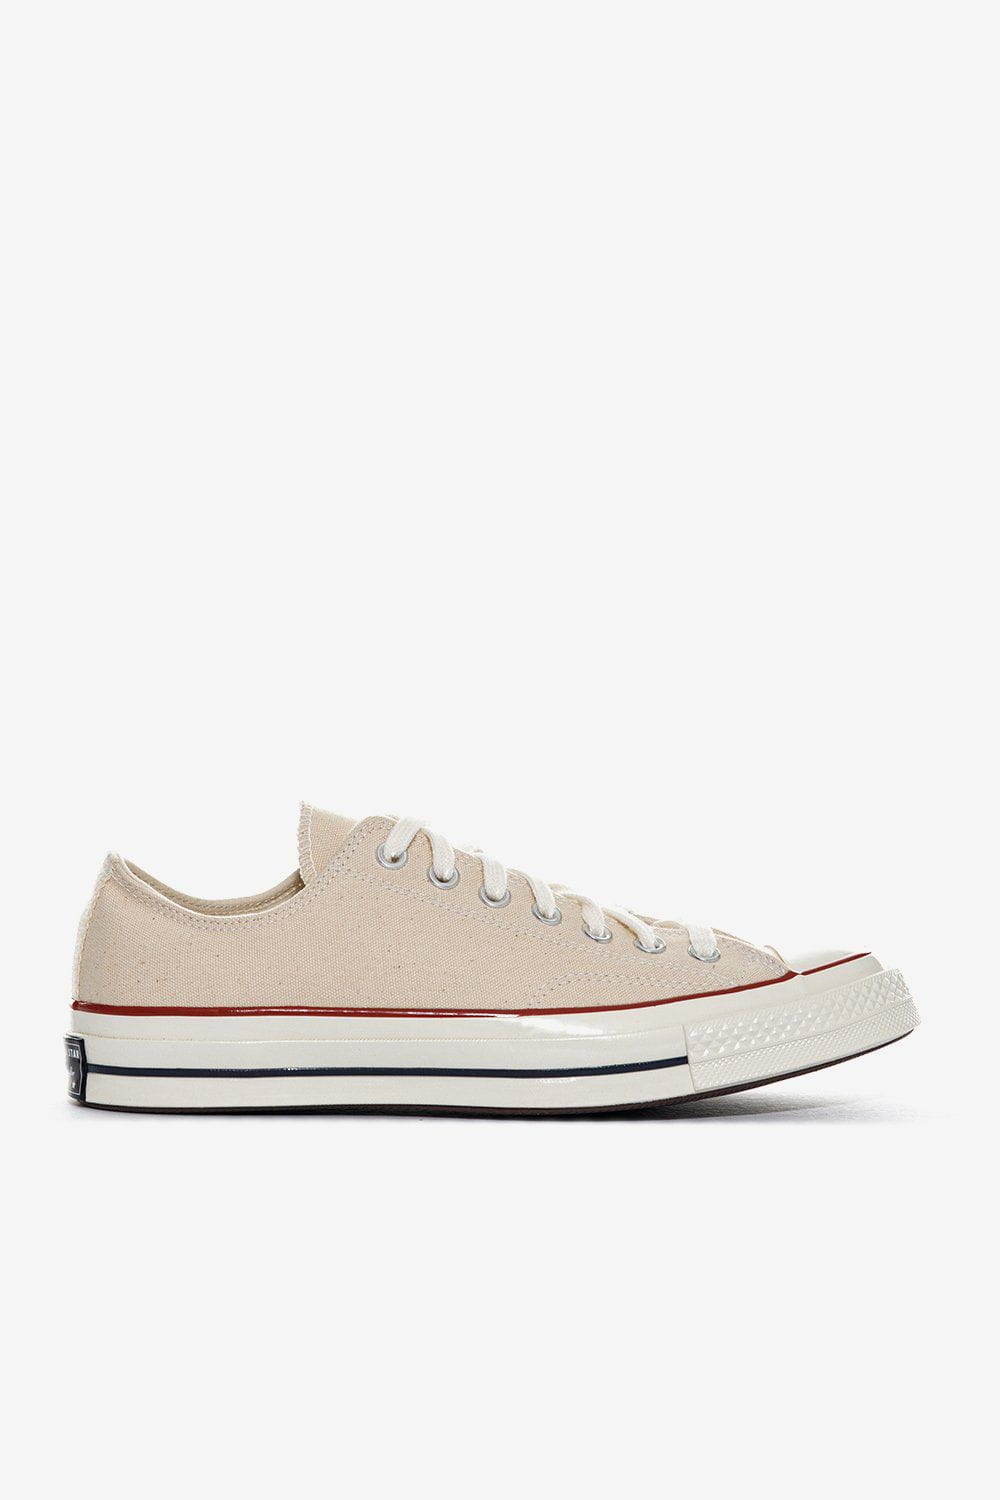 Converse Chuck Taylor 70 Parchment | Commonwealth Philippines Philippines | For The Greater